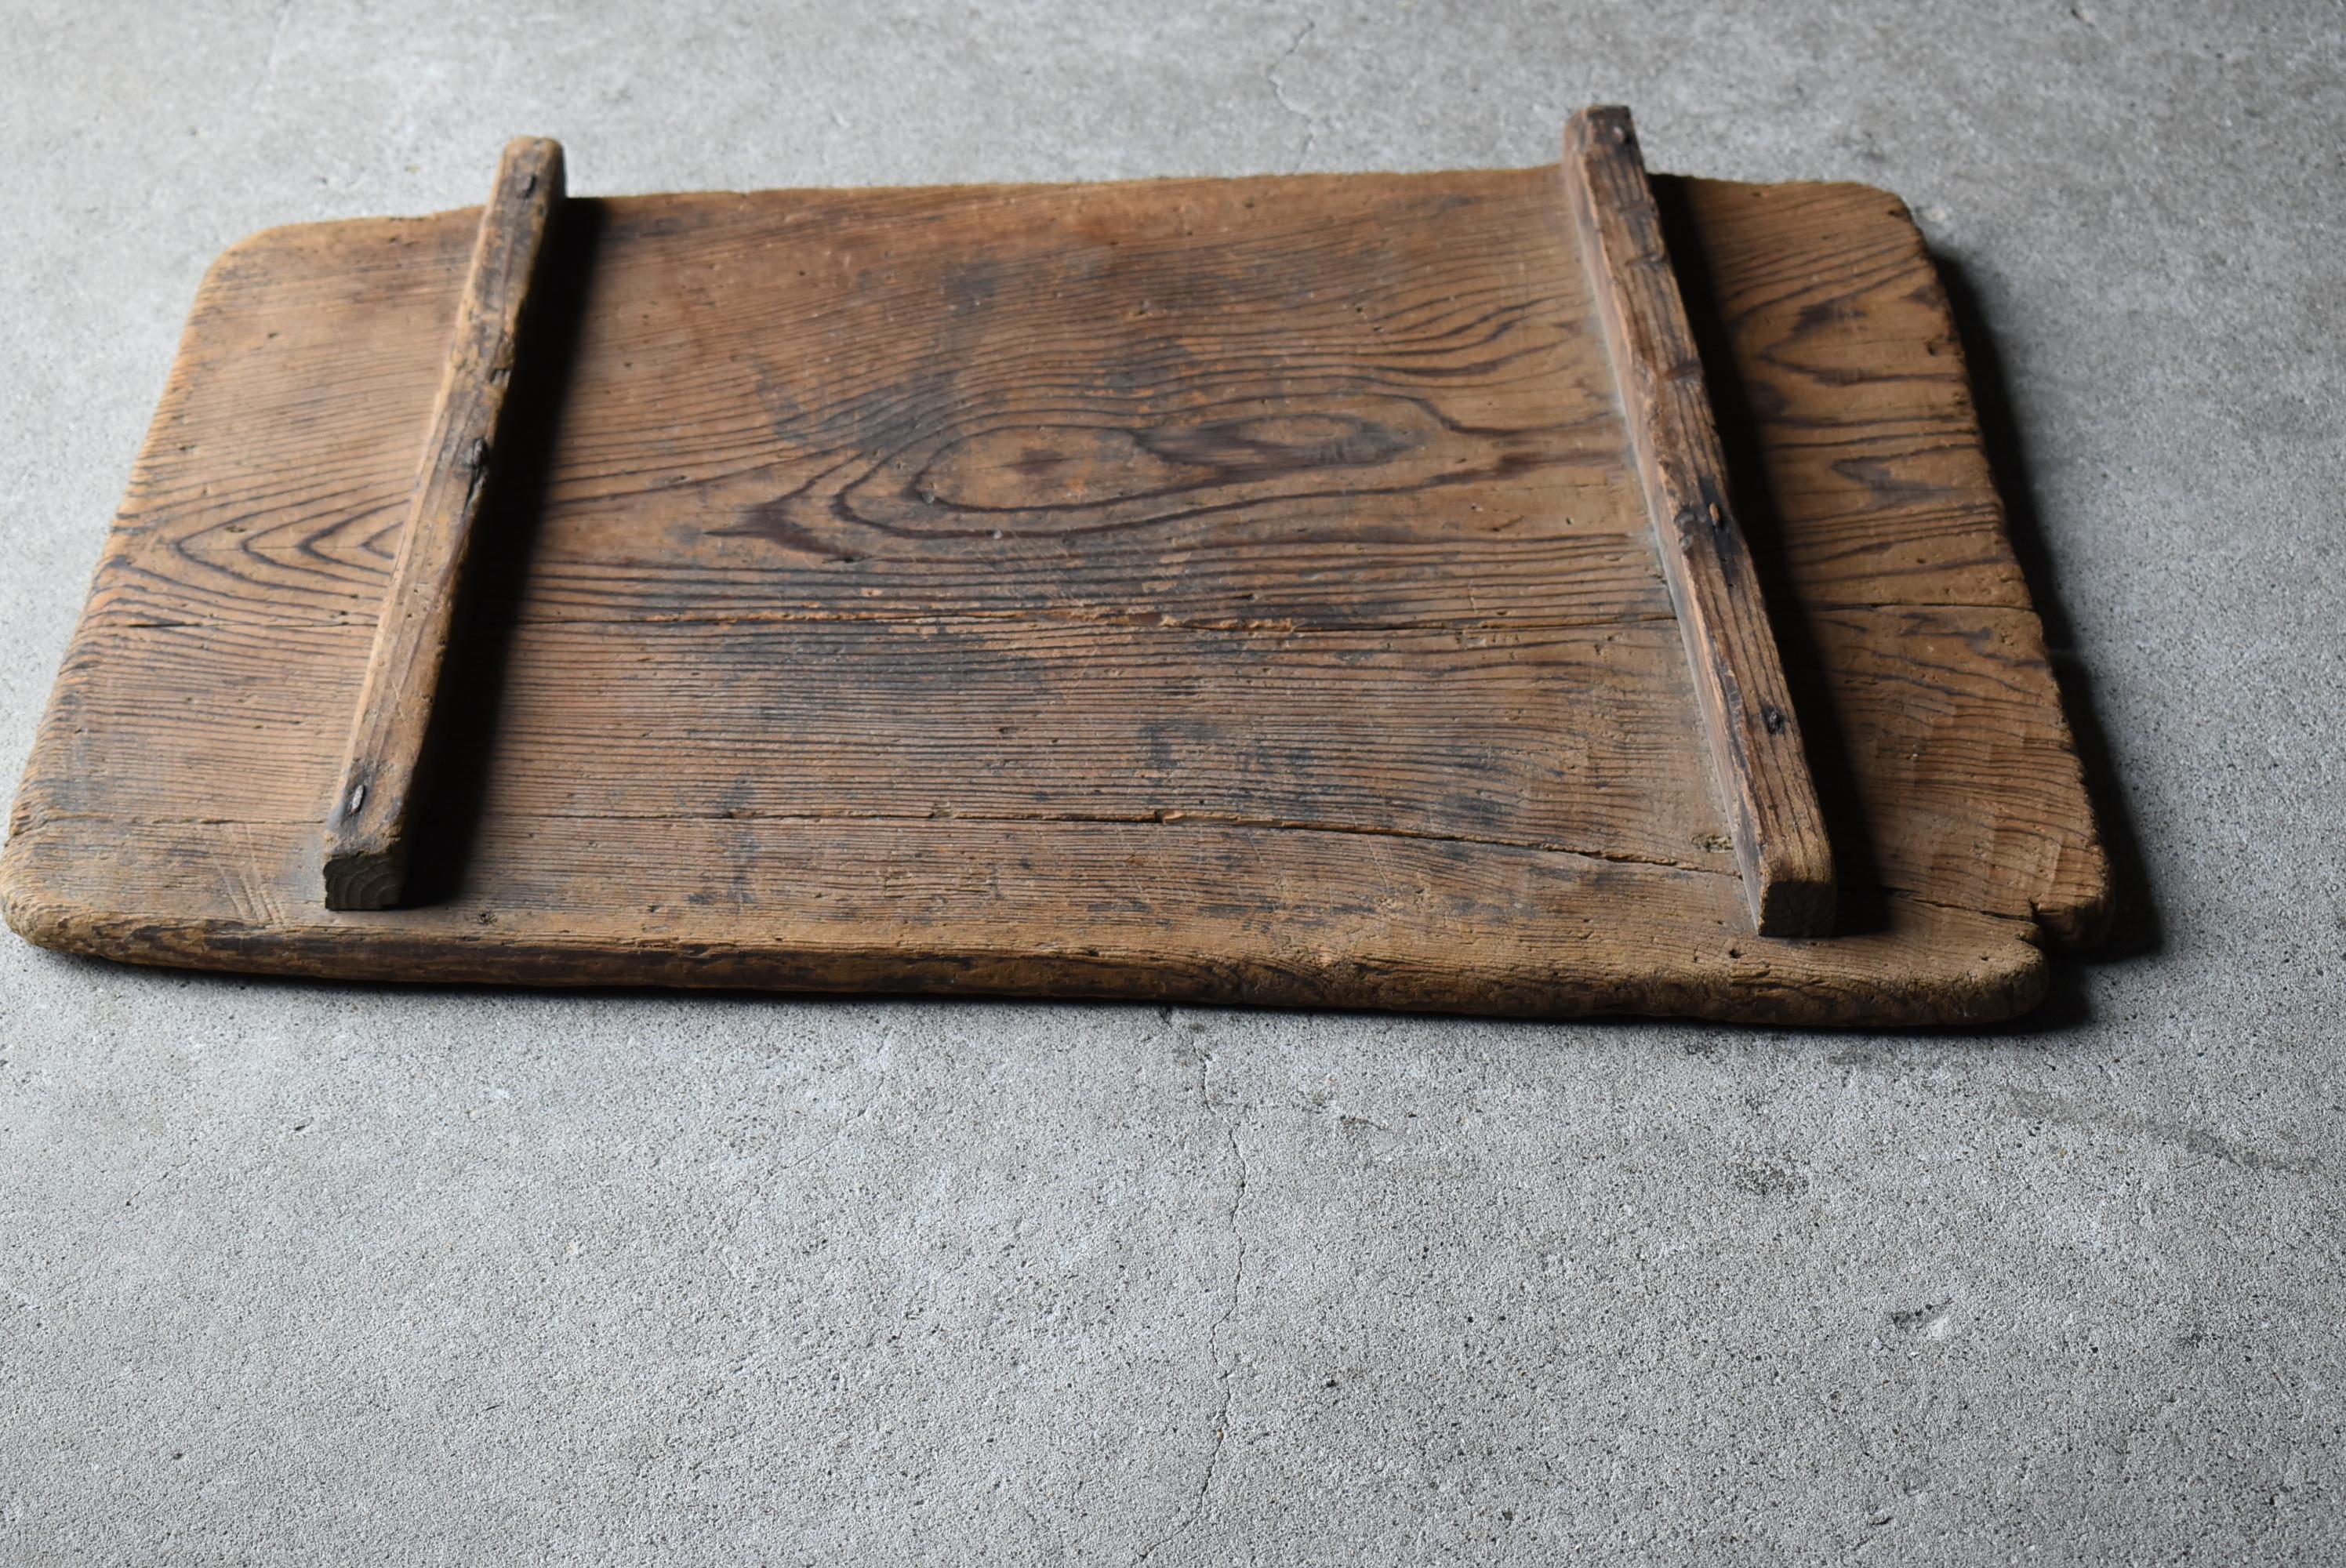 Japanese Antique Wabi Sabi Wooden Board 1860s-1900s / Exhibition Table 7